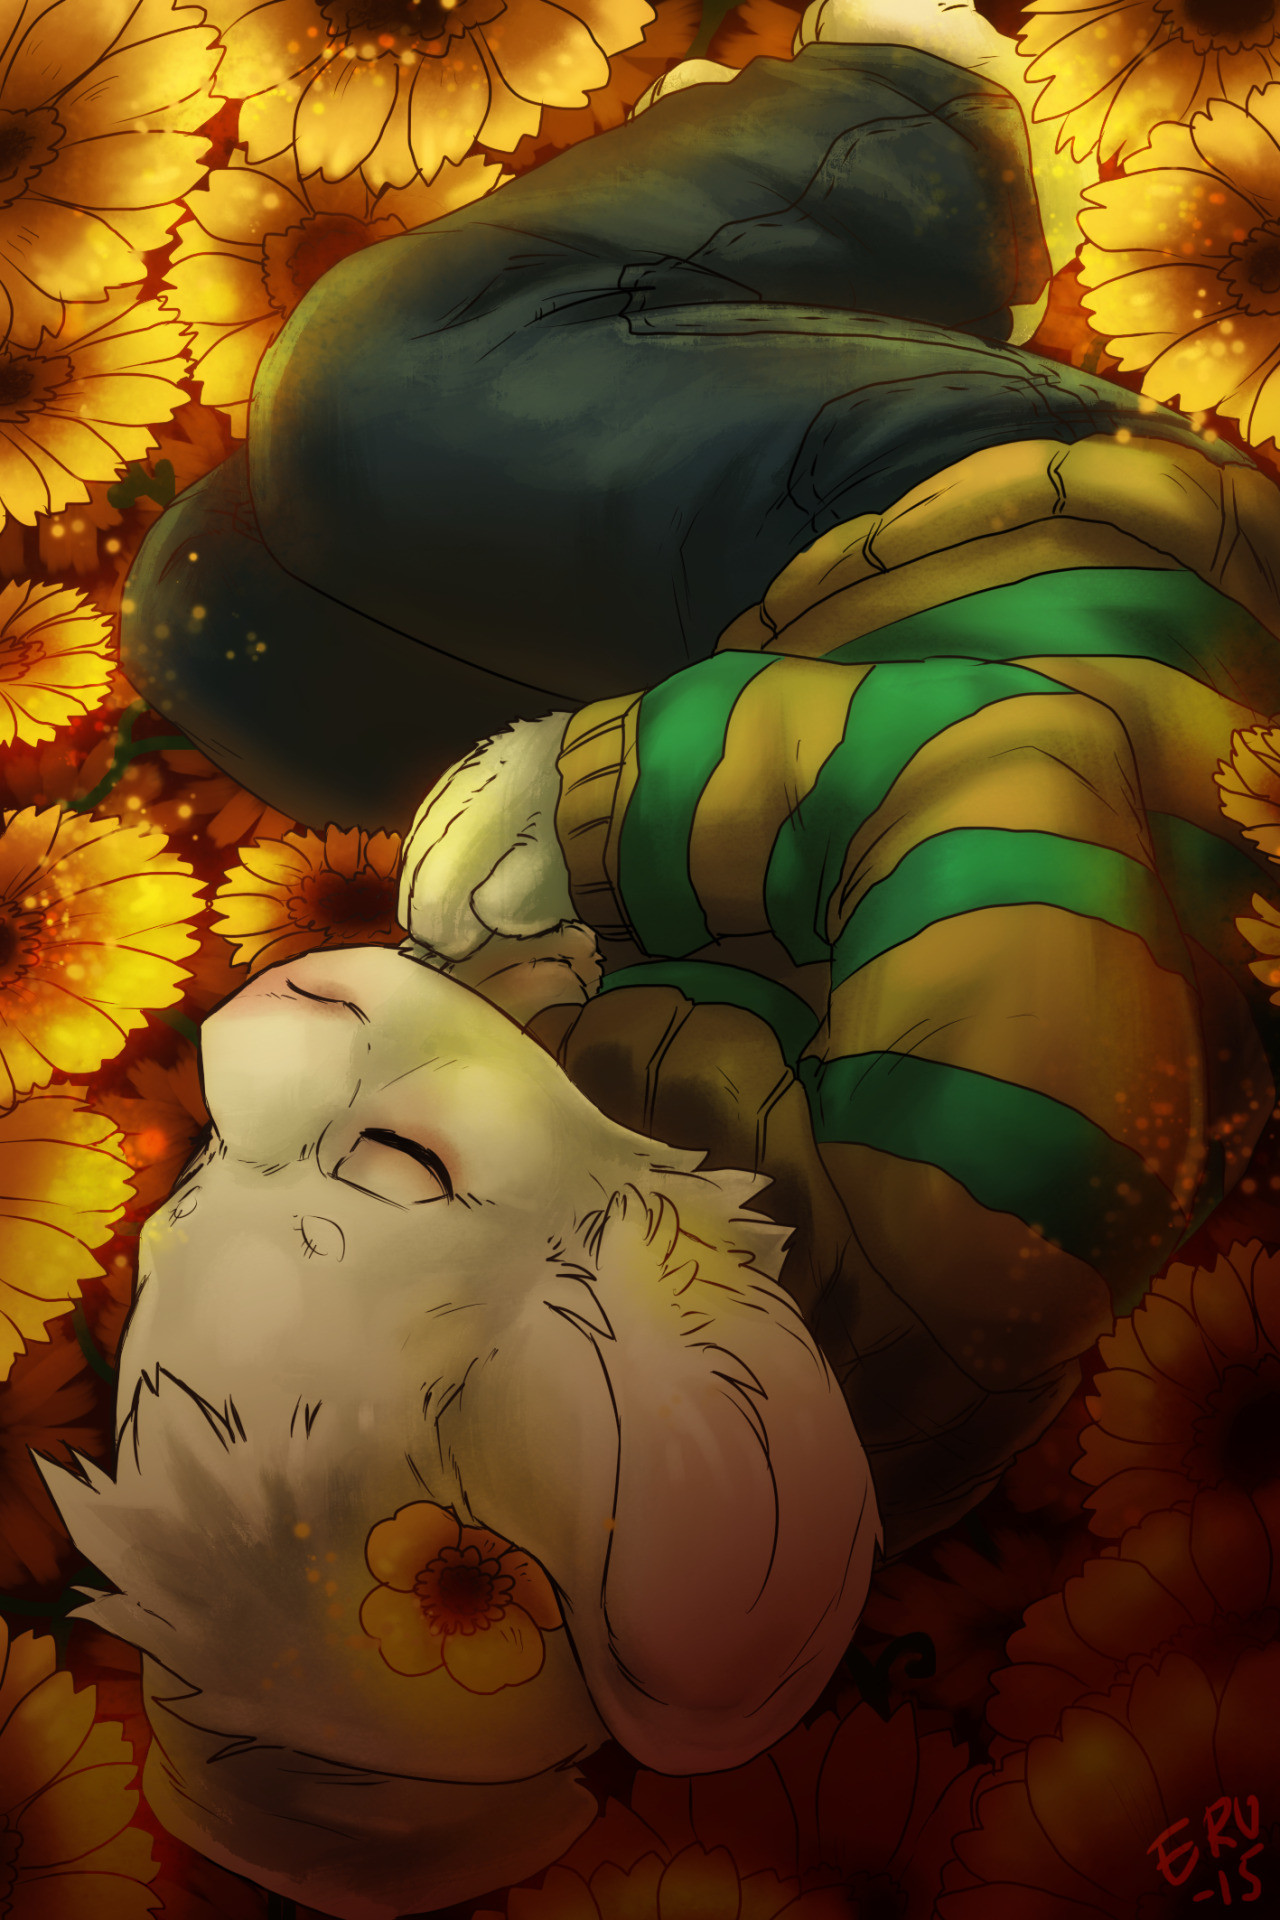 1280x1920 Undertale Mobile Wallpaper. by GenexicanNov 15 2015. Load 28 more images  Grid view